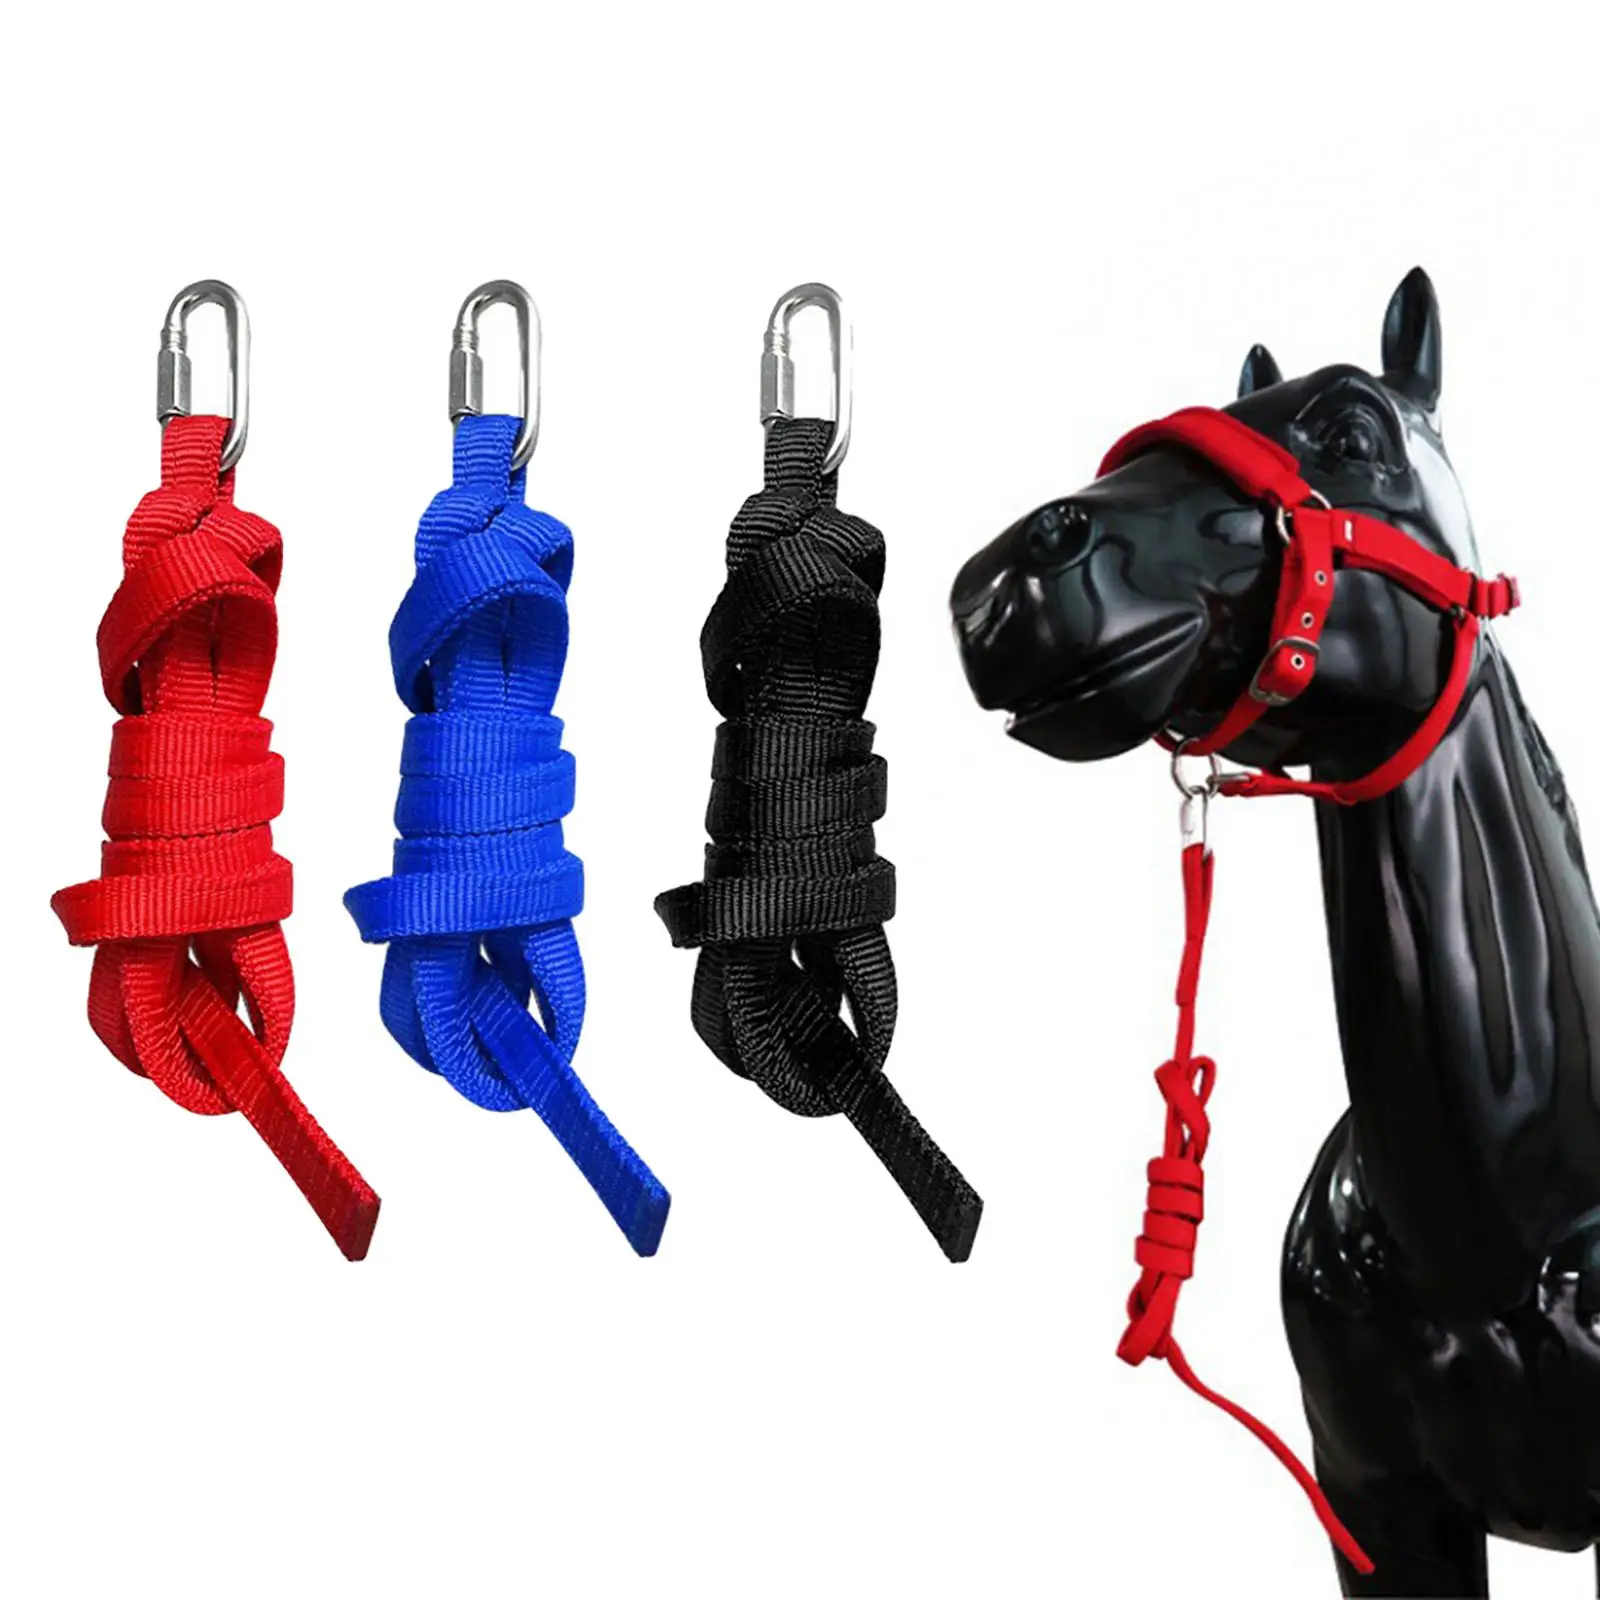 Horse Lead Rope Racing Halters for Leading Training Horse, Goats or Sheep Easy